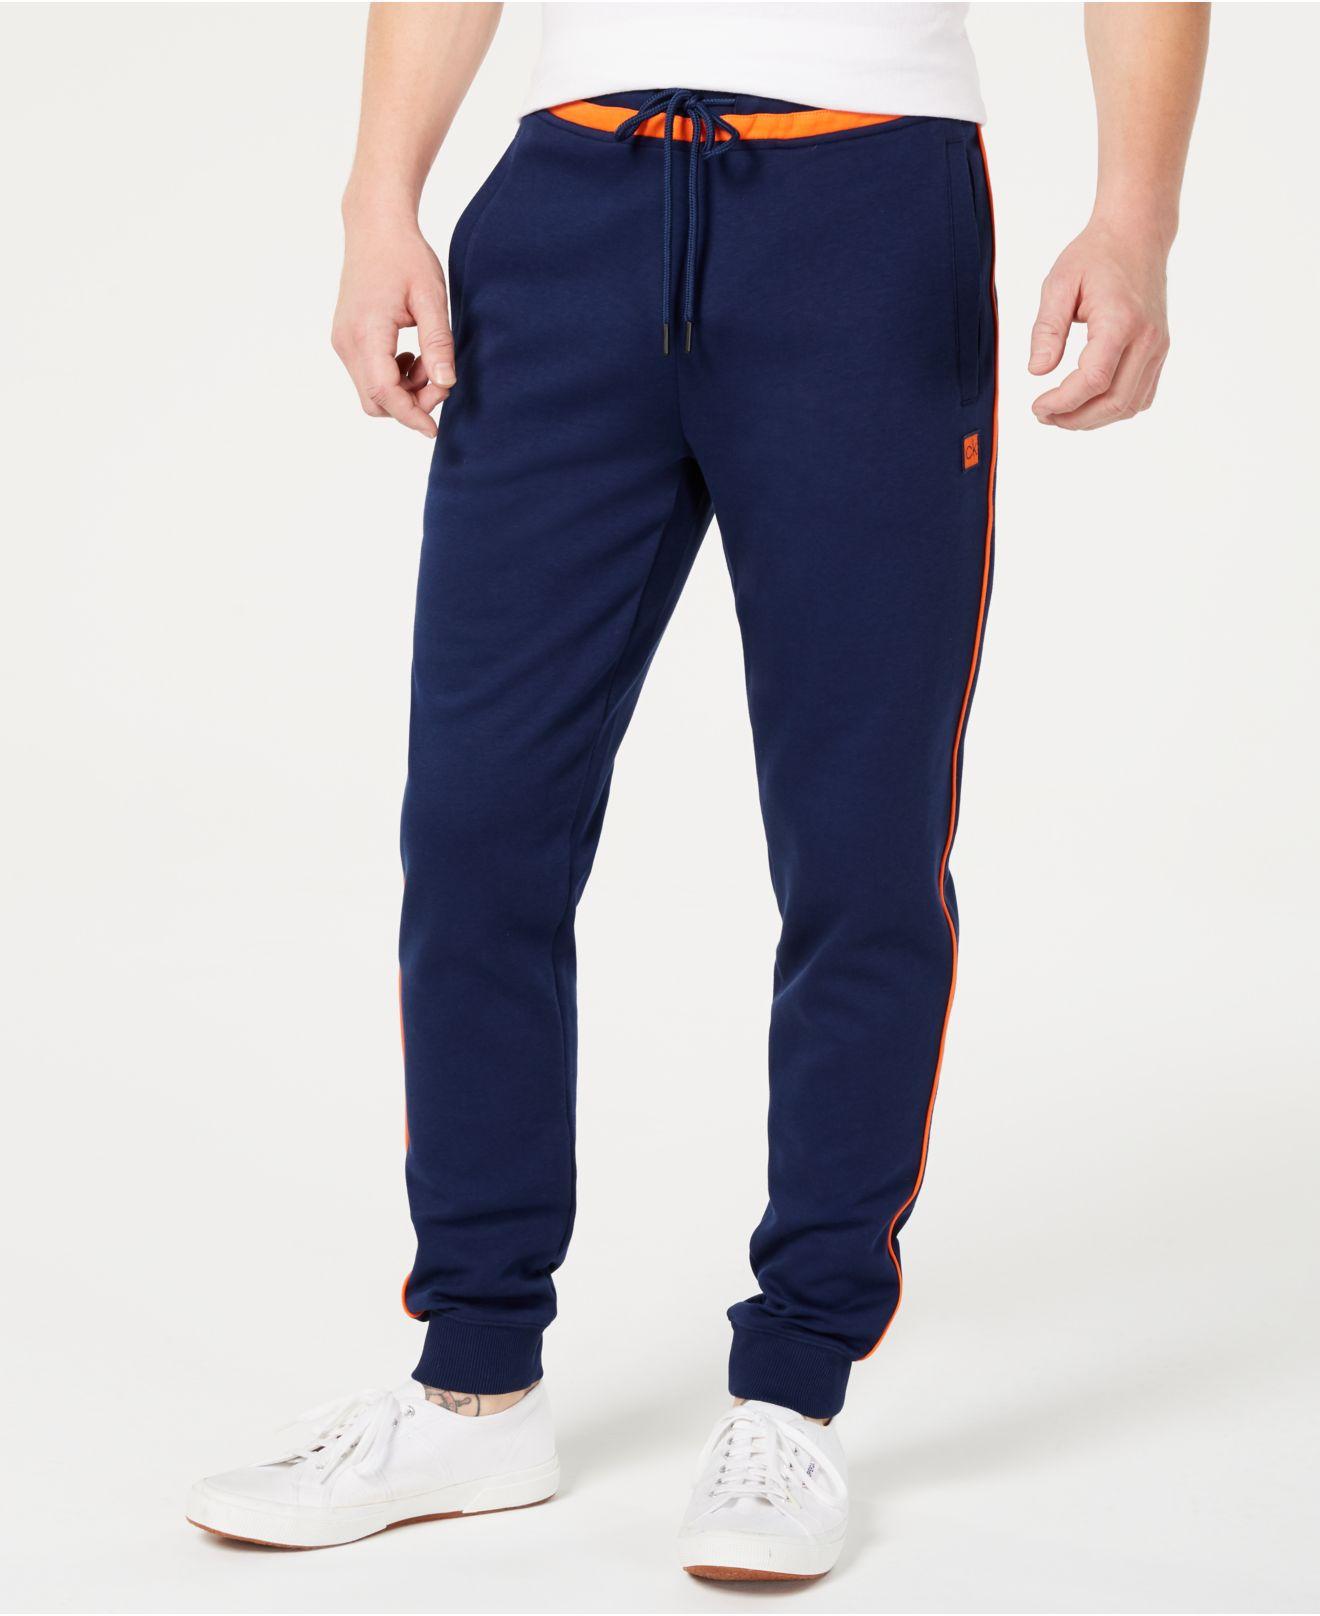 Lyst - Calvin Klein Athleisure Ponte Driver Casual Pants in Blue for Men